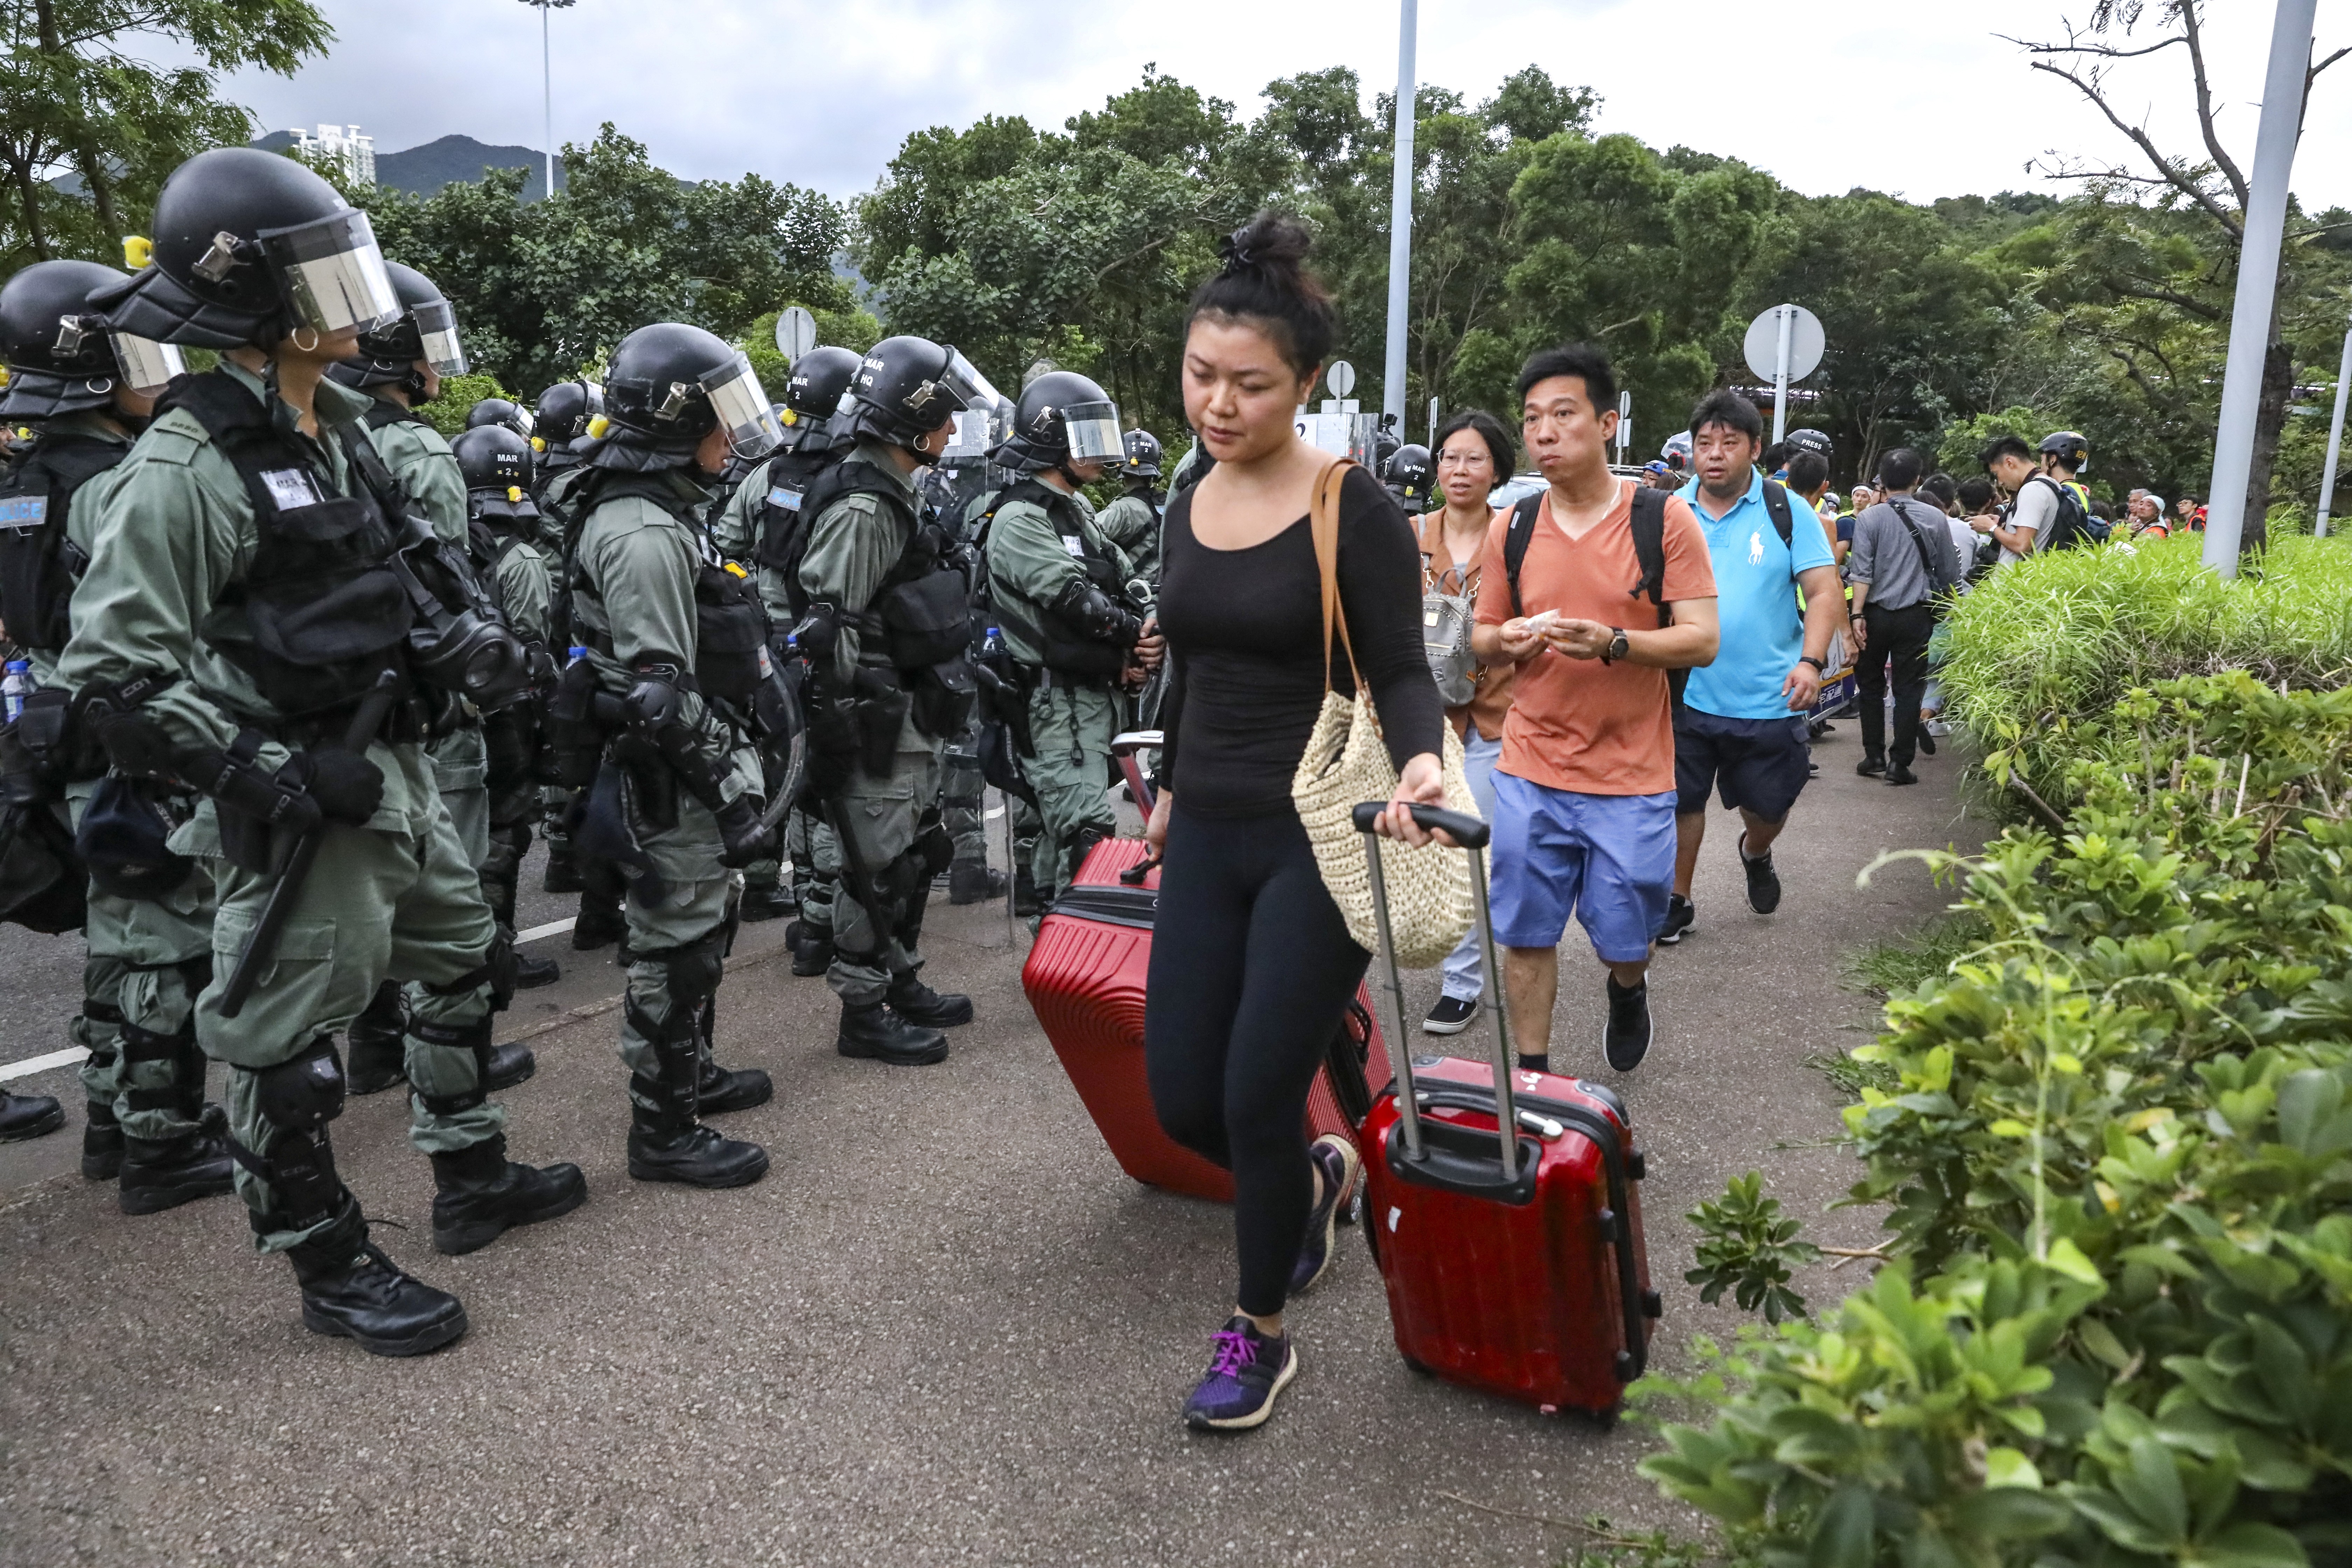 The tourism slump ­happened as the protests became regular and increasingly violent. Photo: K.Y. Cheng